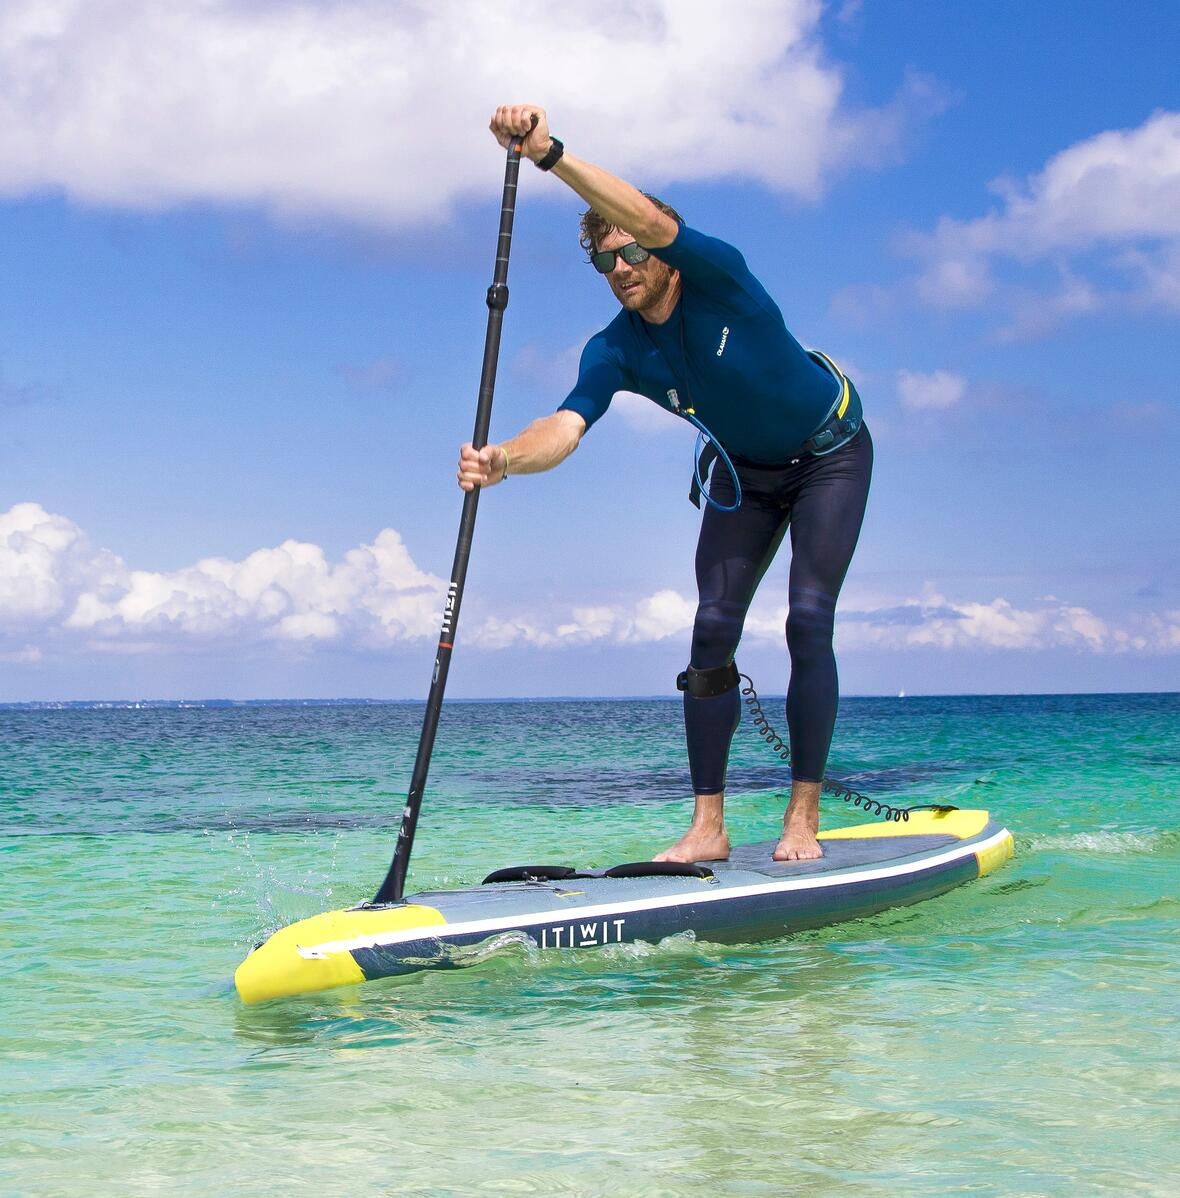 racing stand-up paddle board